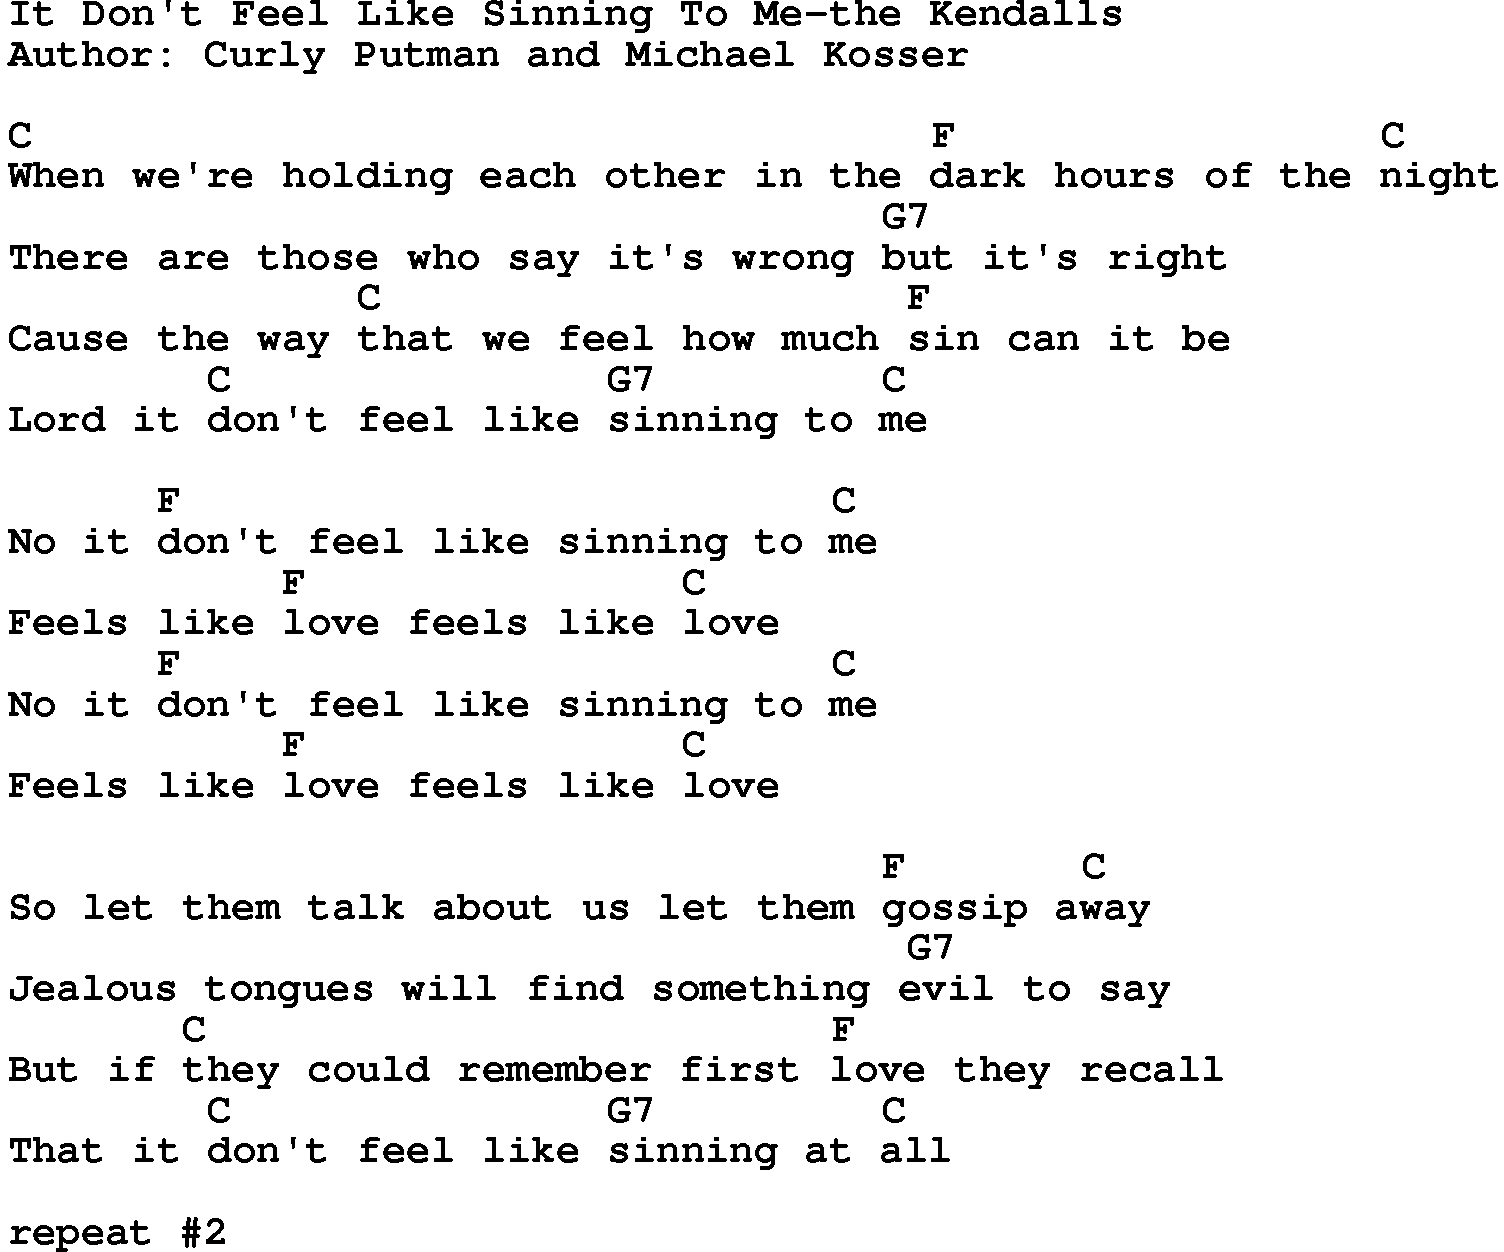 Country music song: It Don't Feel Like Sinning To Me-The Kendalls lyrics and chords